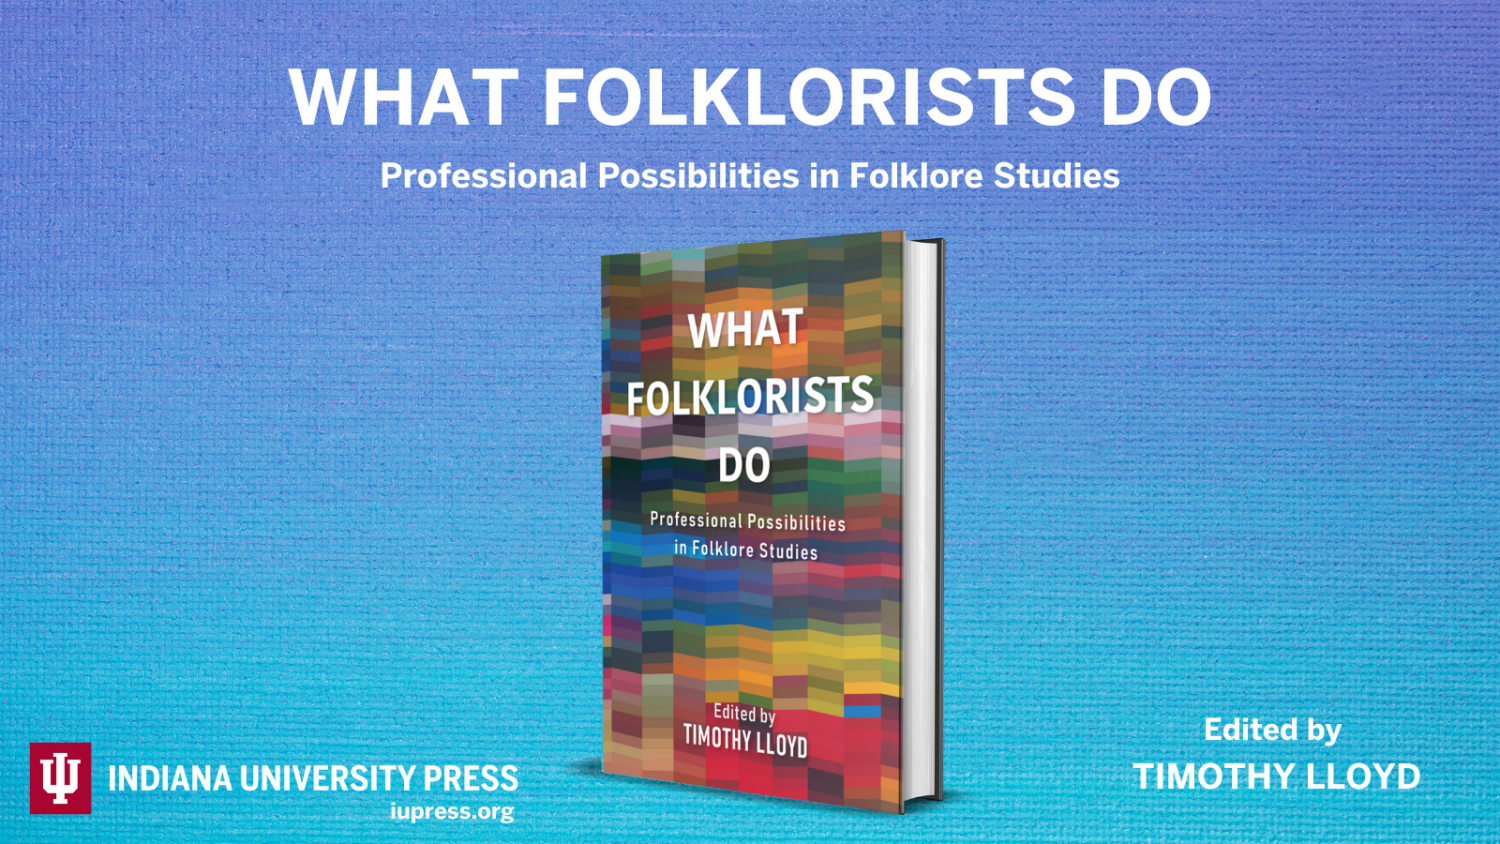 Cover design for the book "What Folklorists Do".